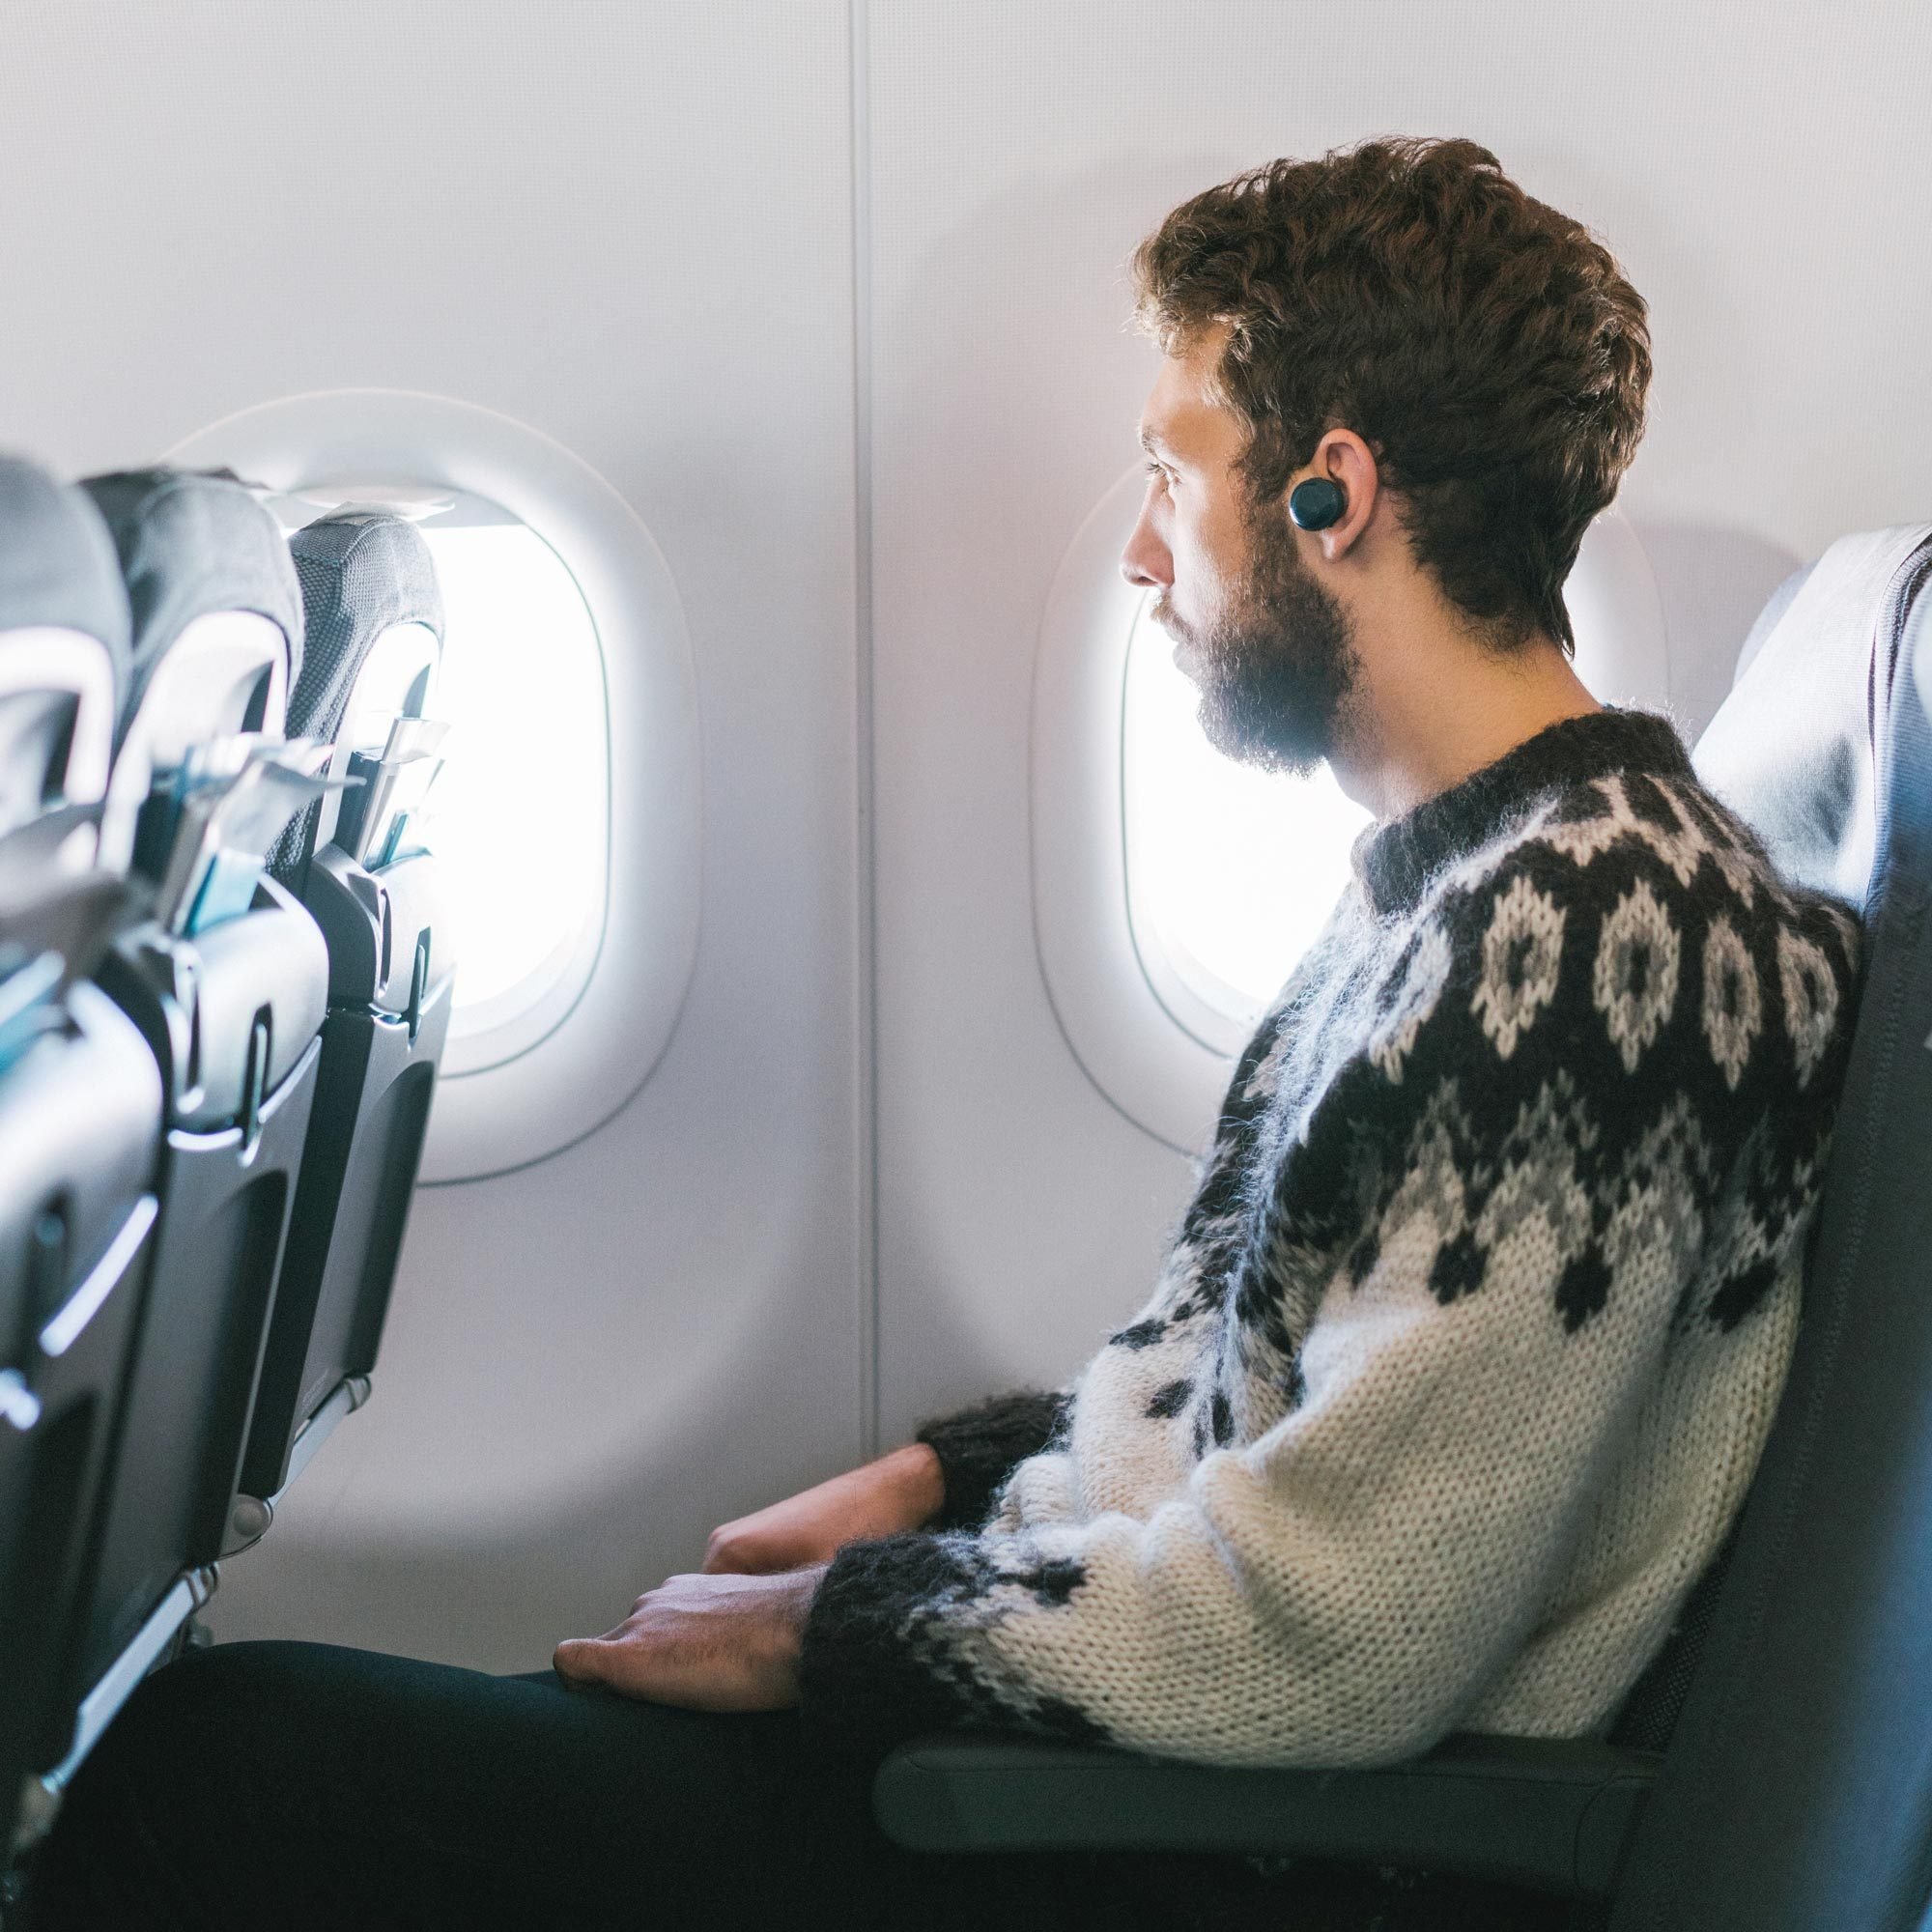 This Is Why It’s So Cold on Airplanes